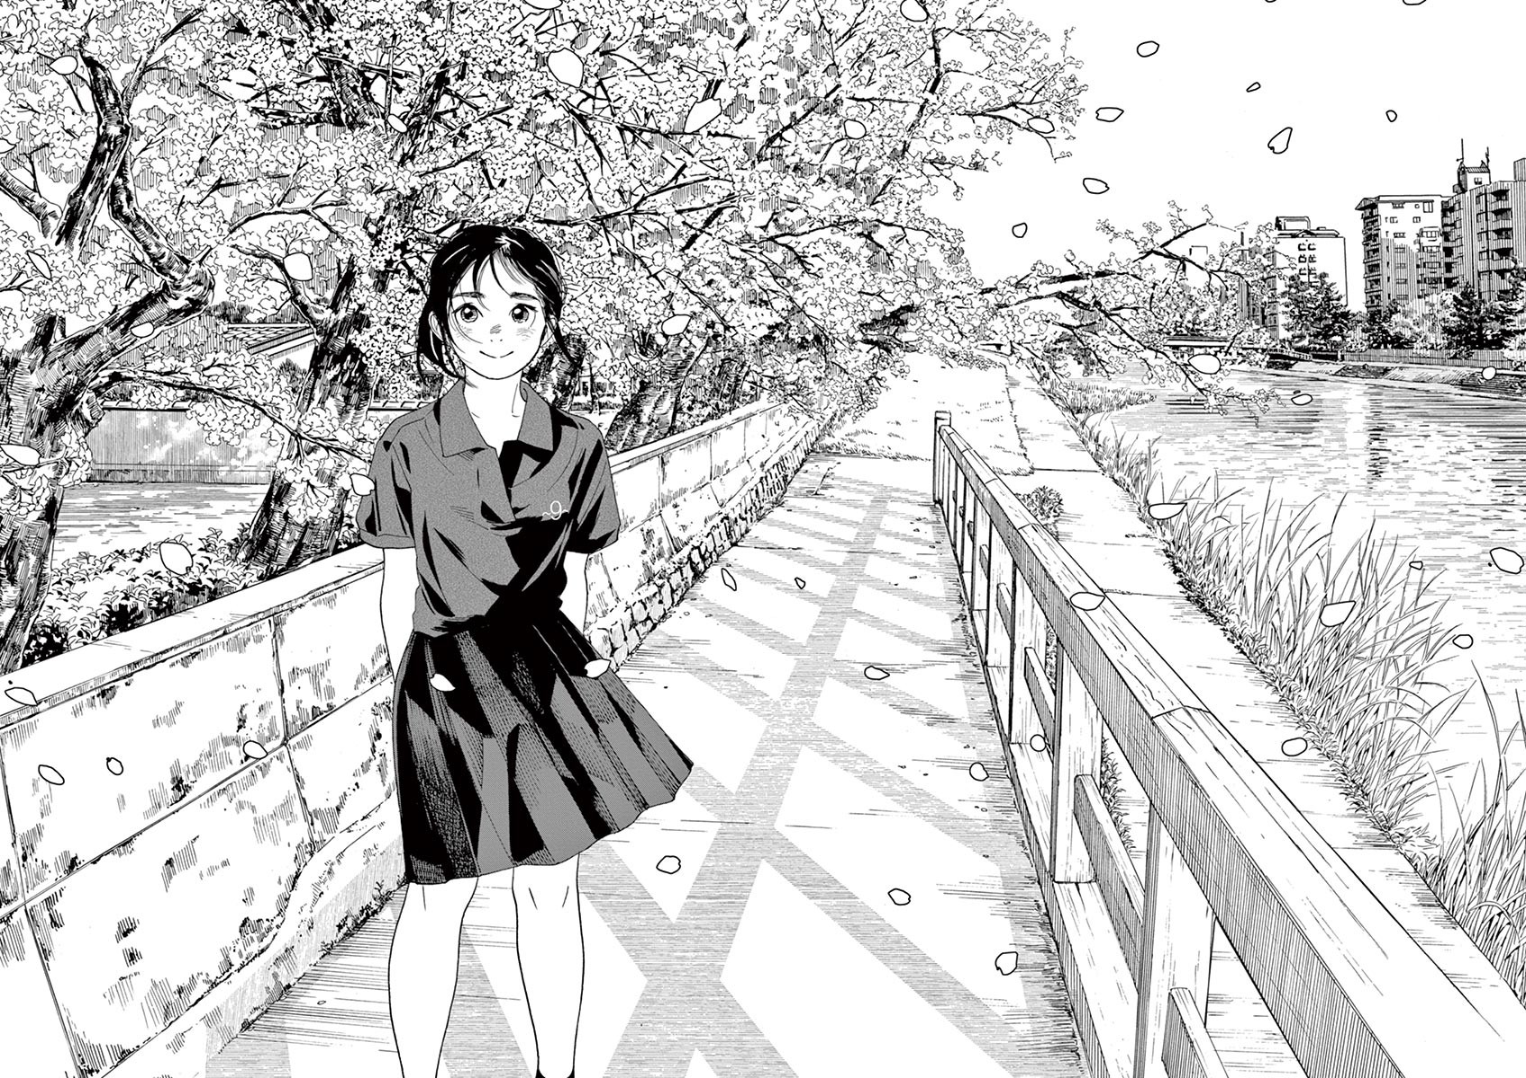 Kimi wa Houkago Insomnia Chapter 40 Discussion - Forums